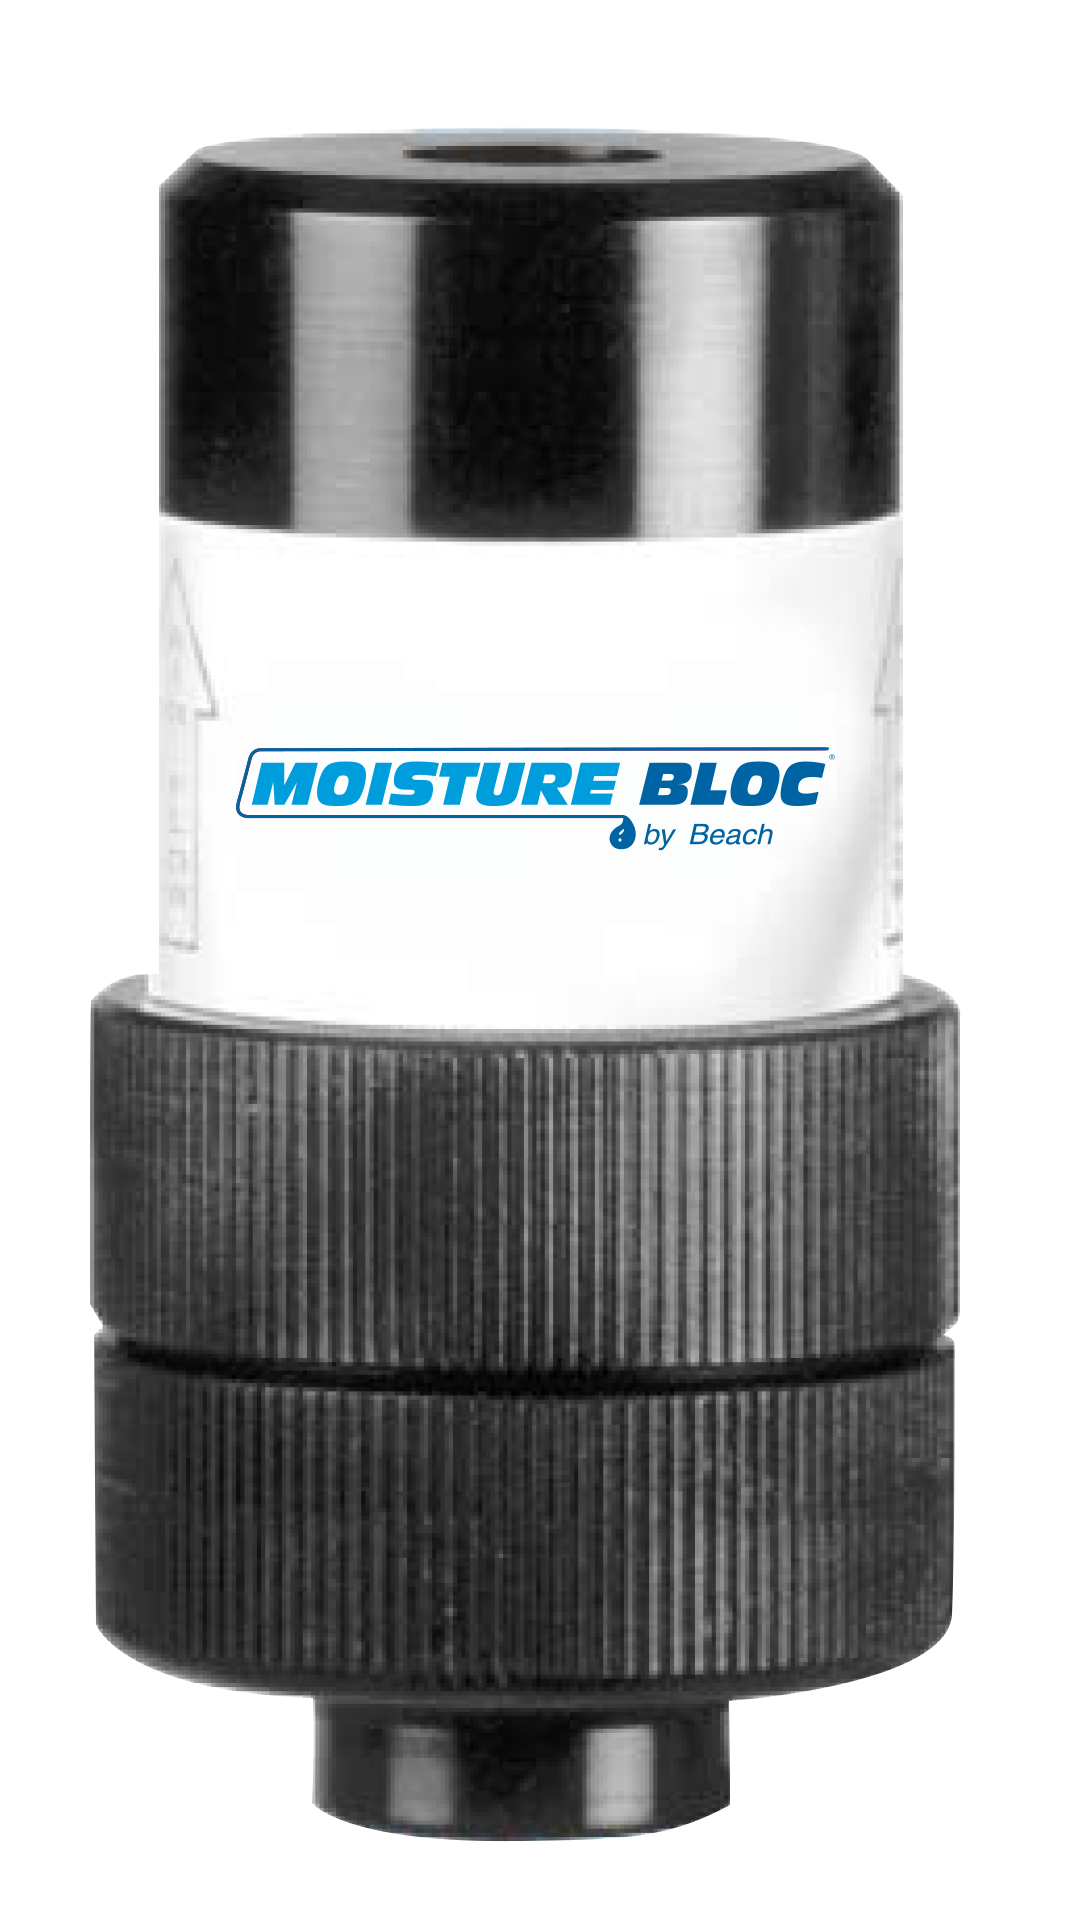 MoistureBloc™ Industrial Air filters for rust and mold control